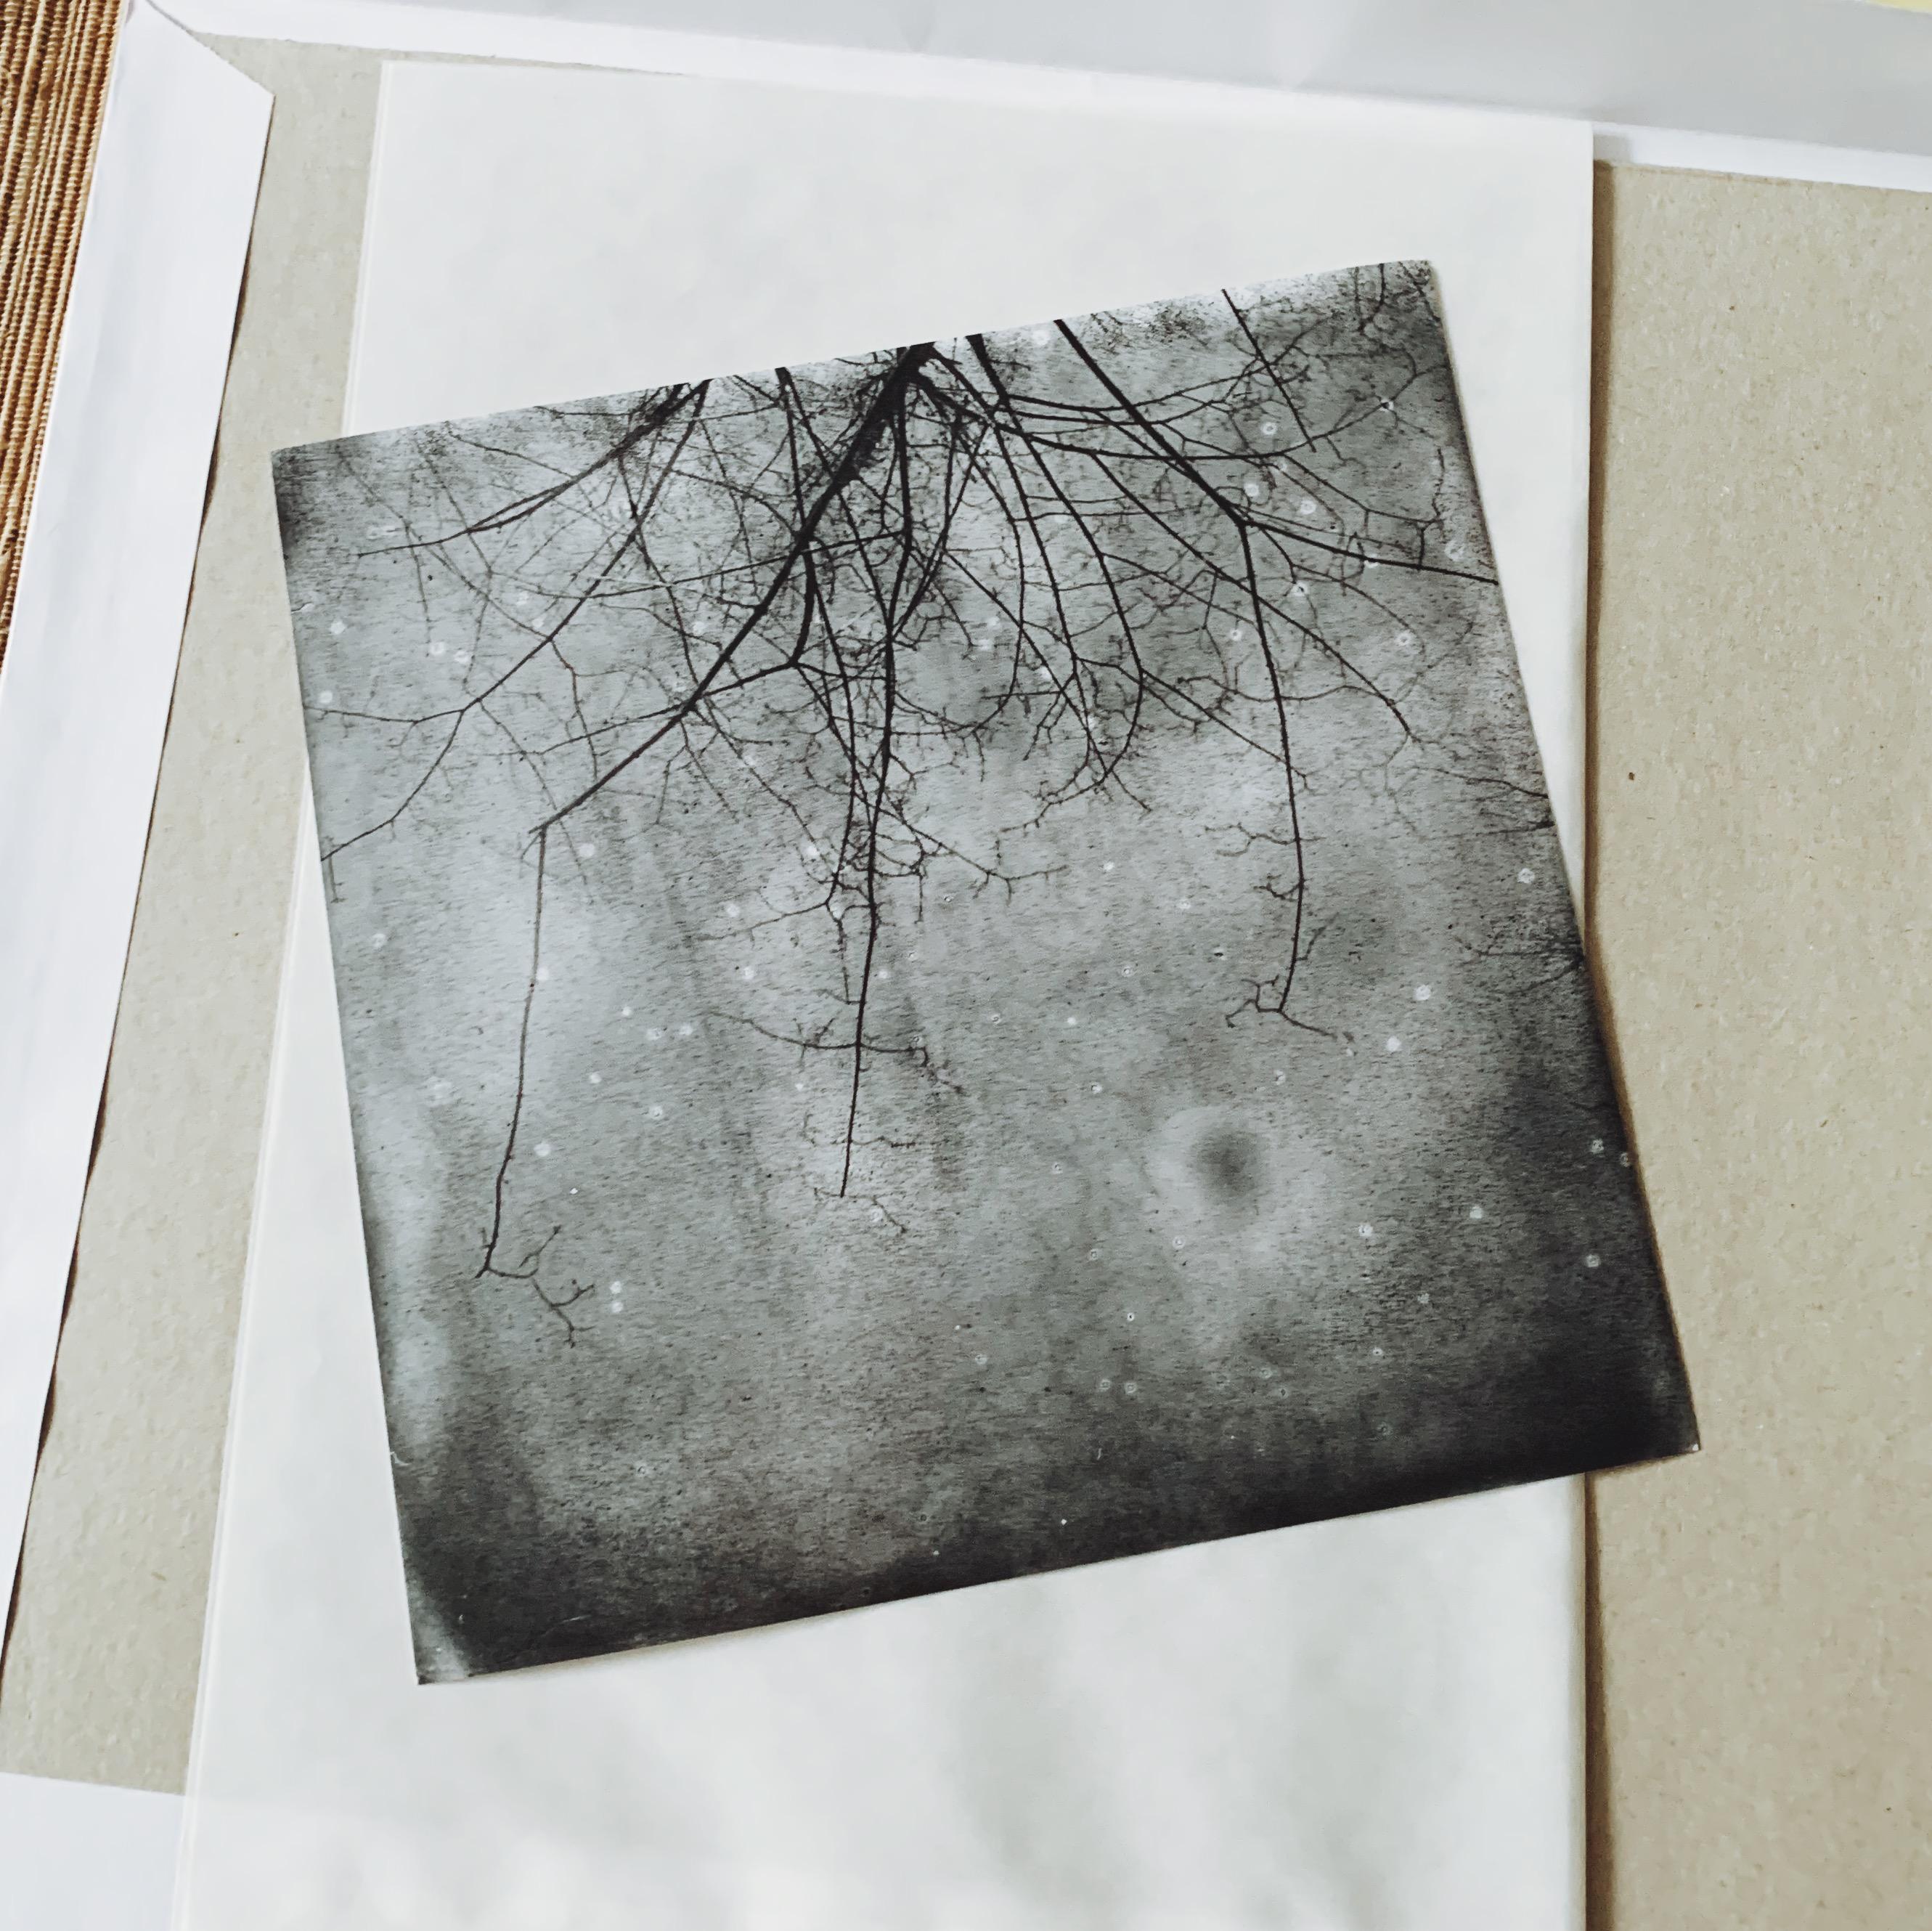 And also the Trees - 21st Century, Polaroid, Landscape Photography, Contemporary 1